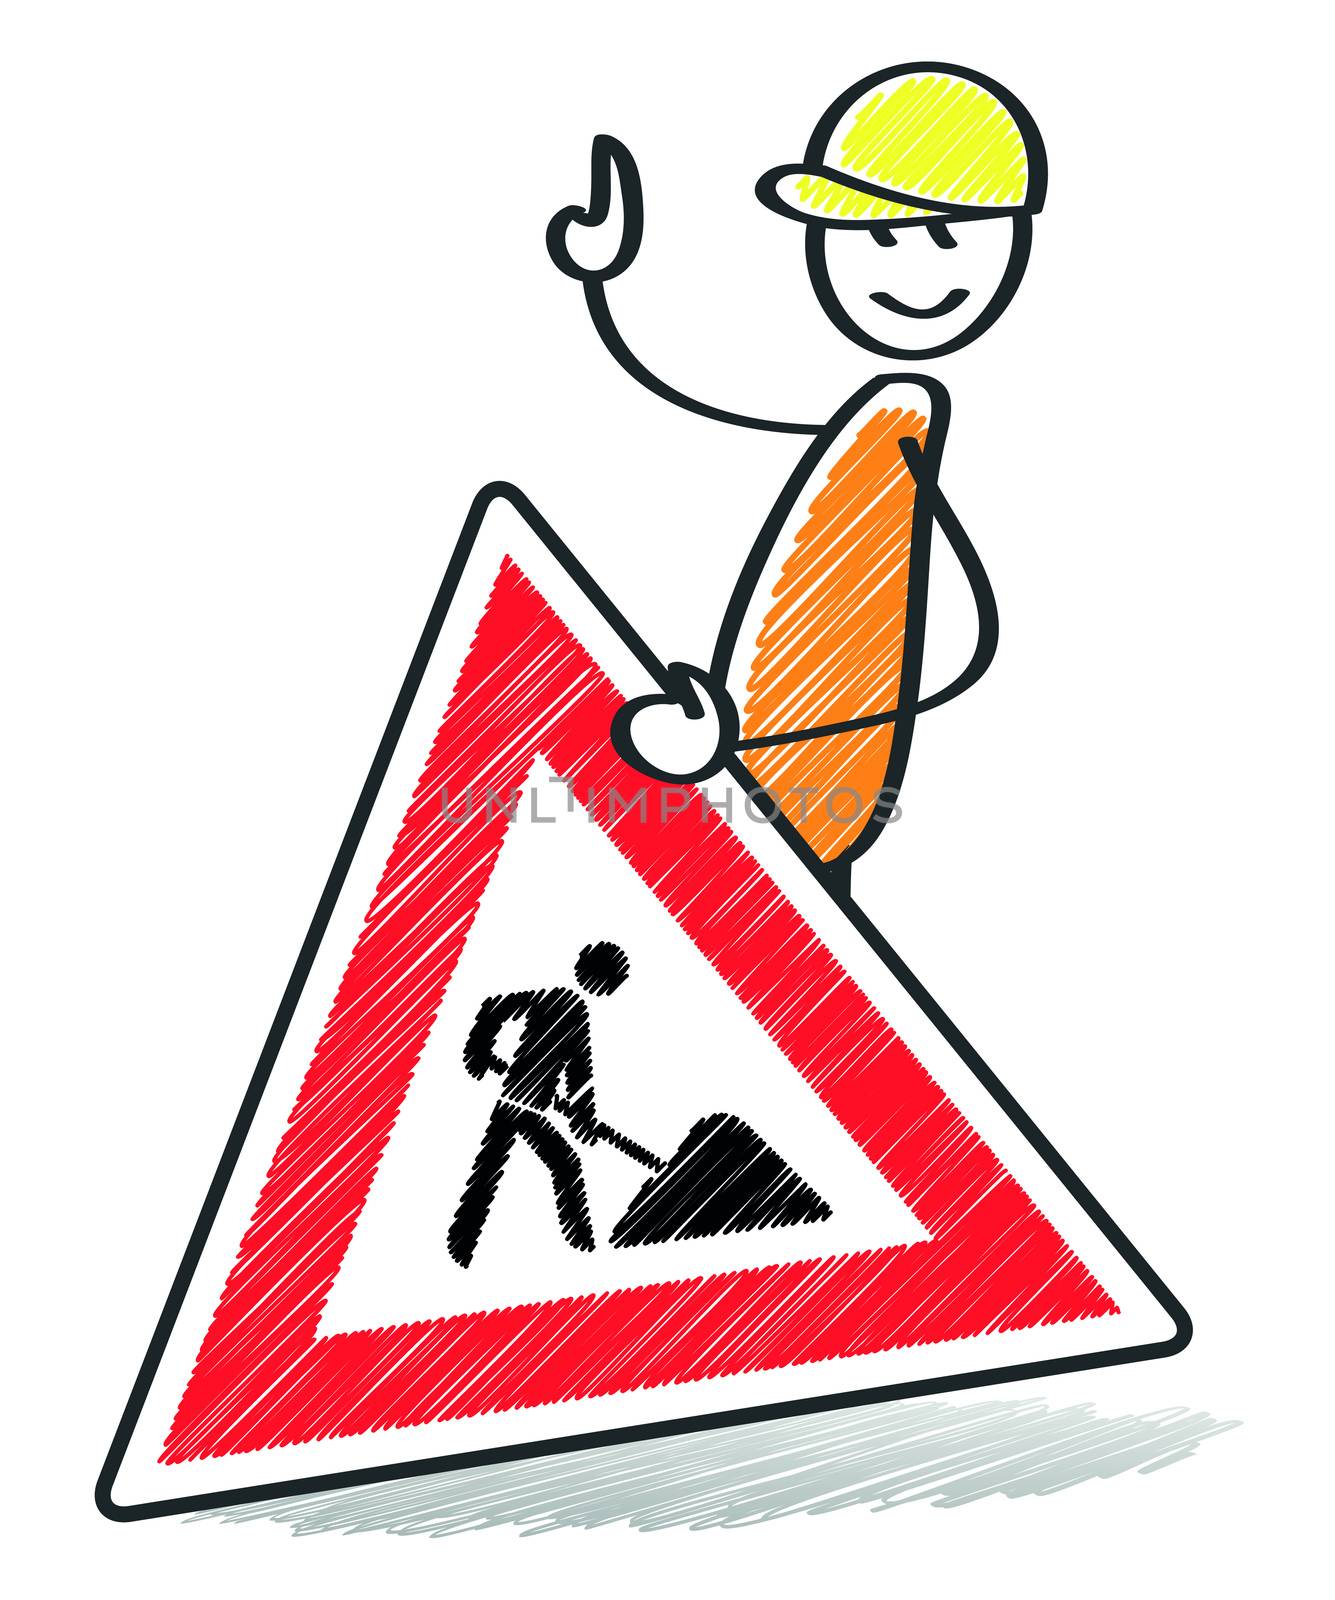 An image of a warning sign with a stick man